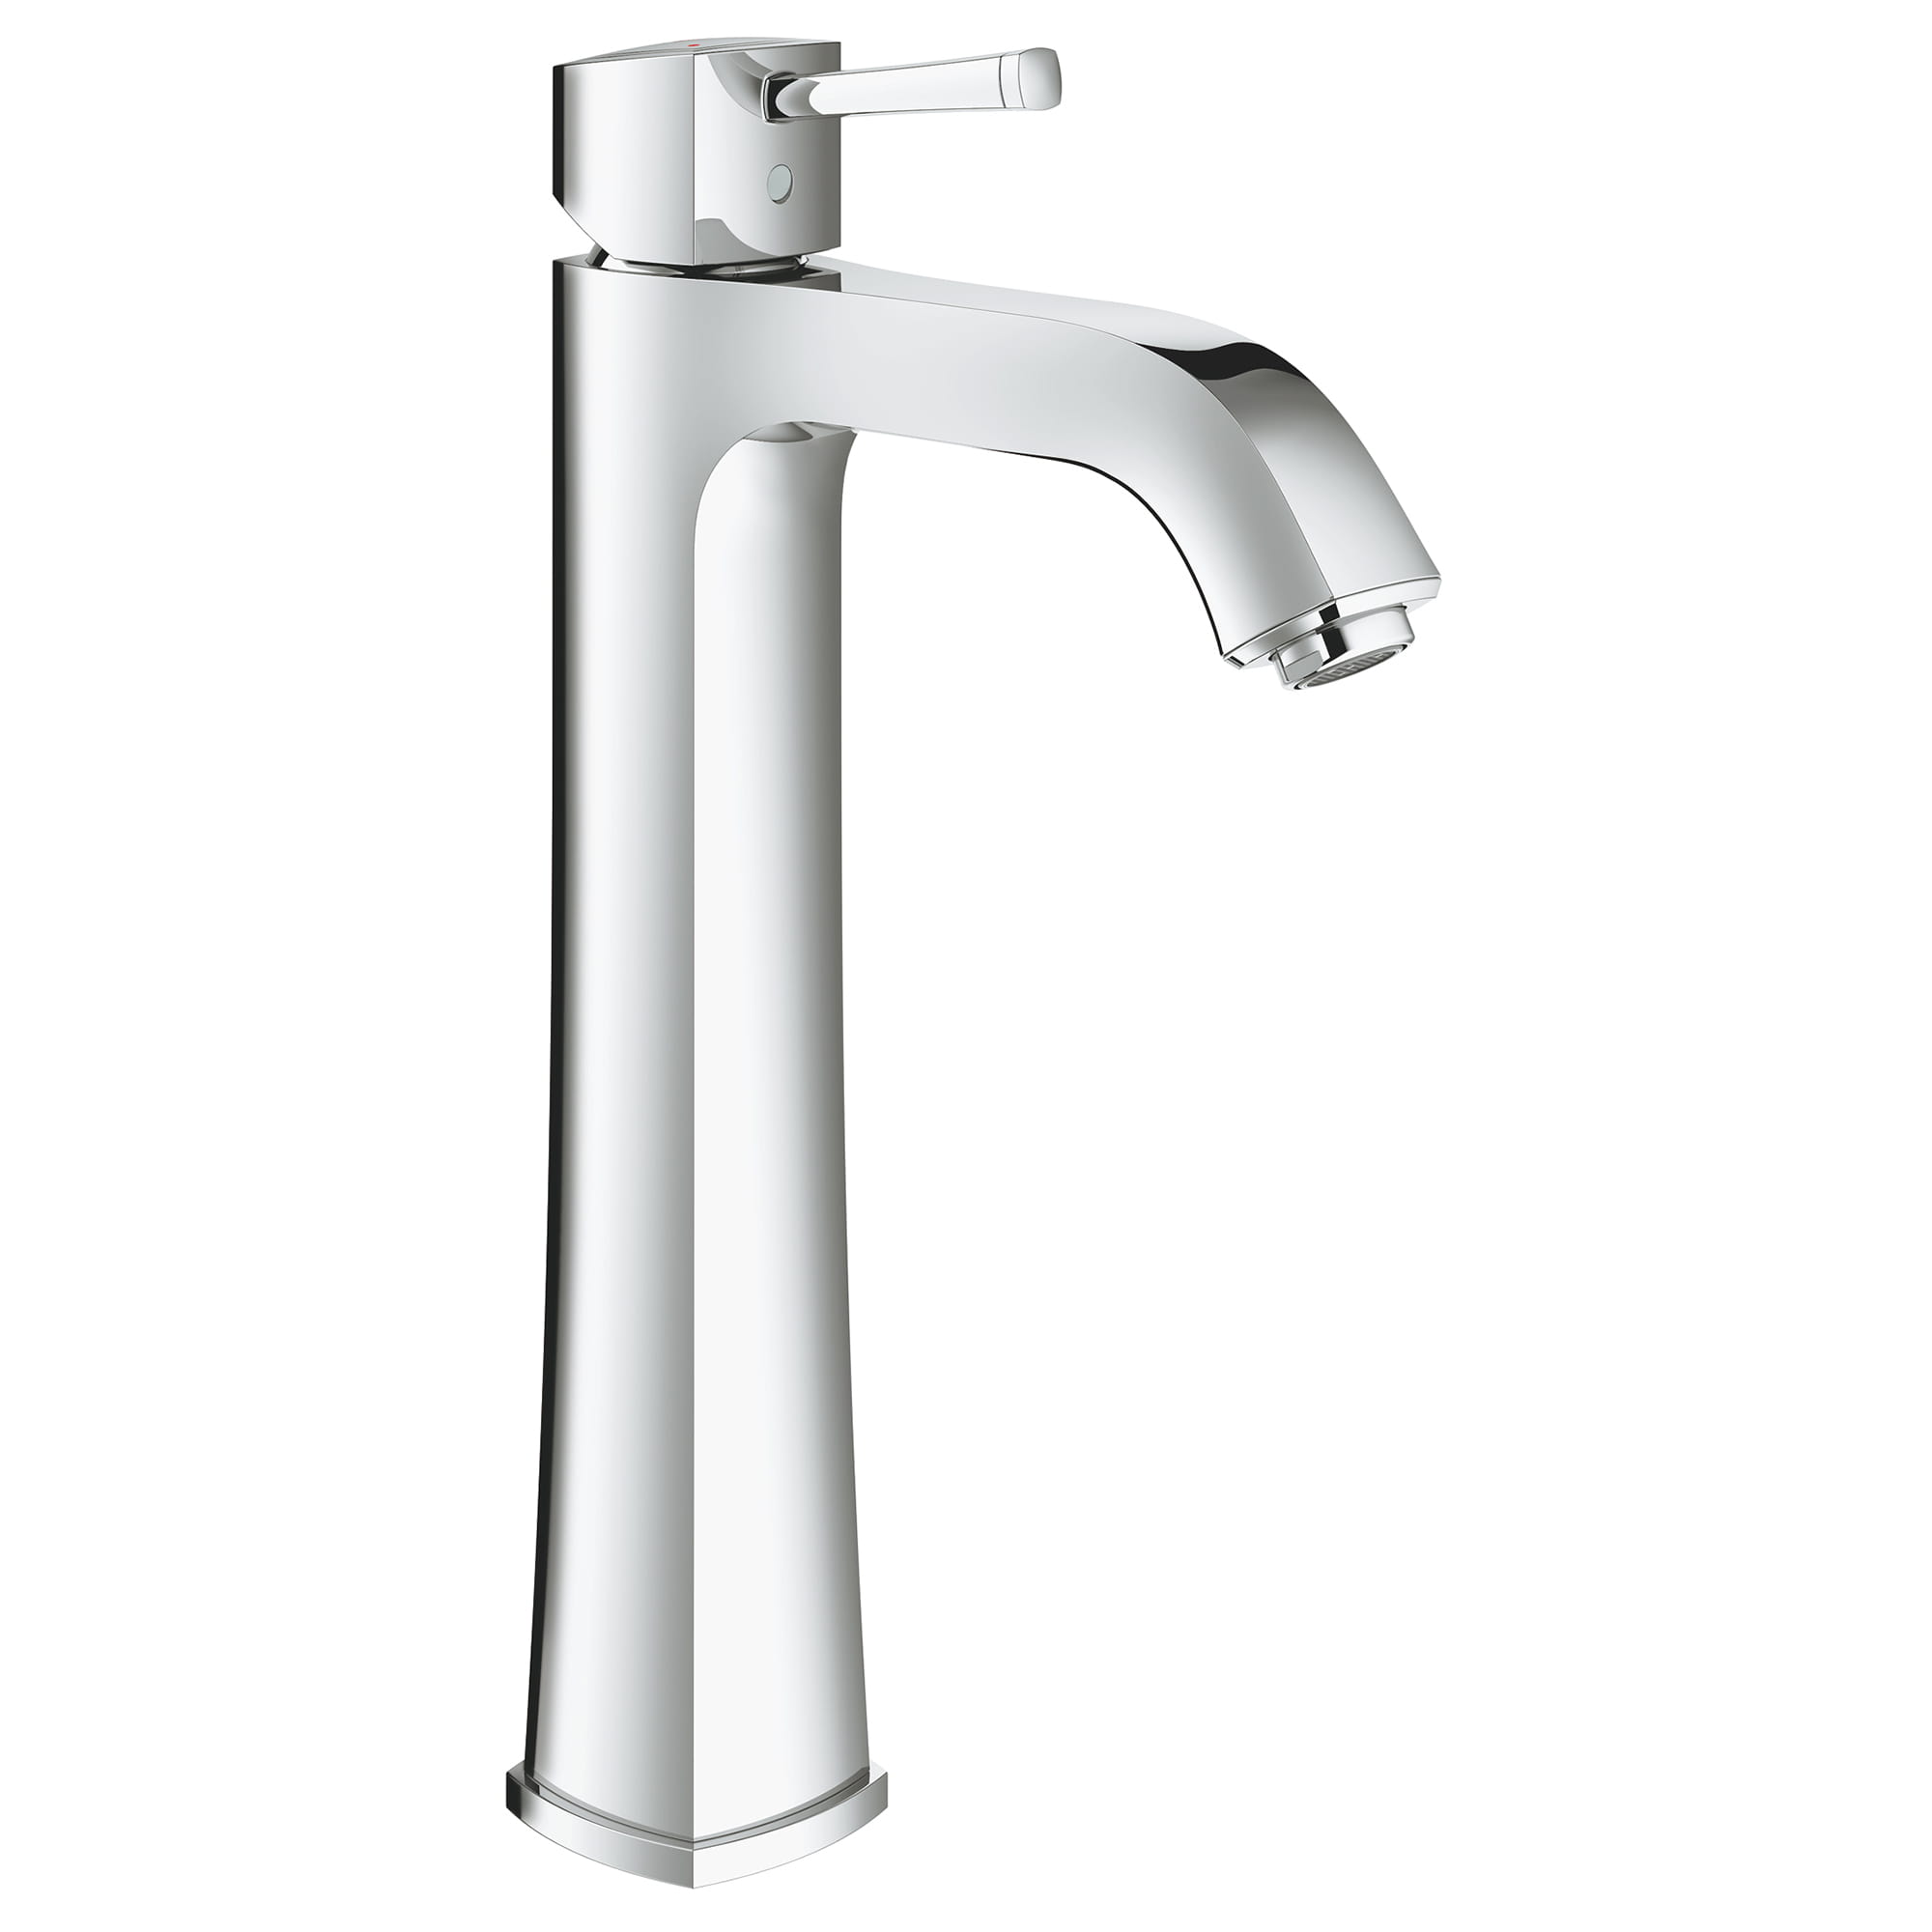 SINGLE HOLE SINGLE-HANDLE DECK MOUNT VESSEL SINK FAUCET 1.2 GPM-related